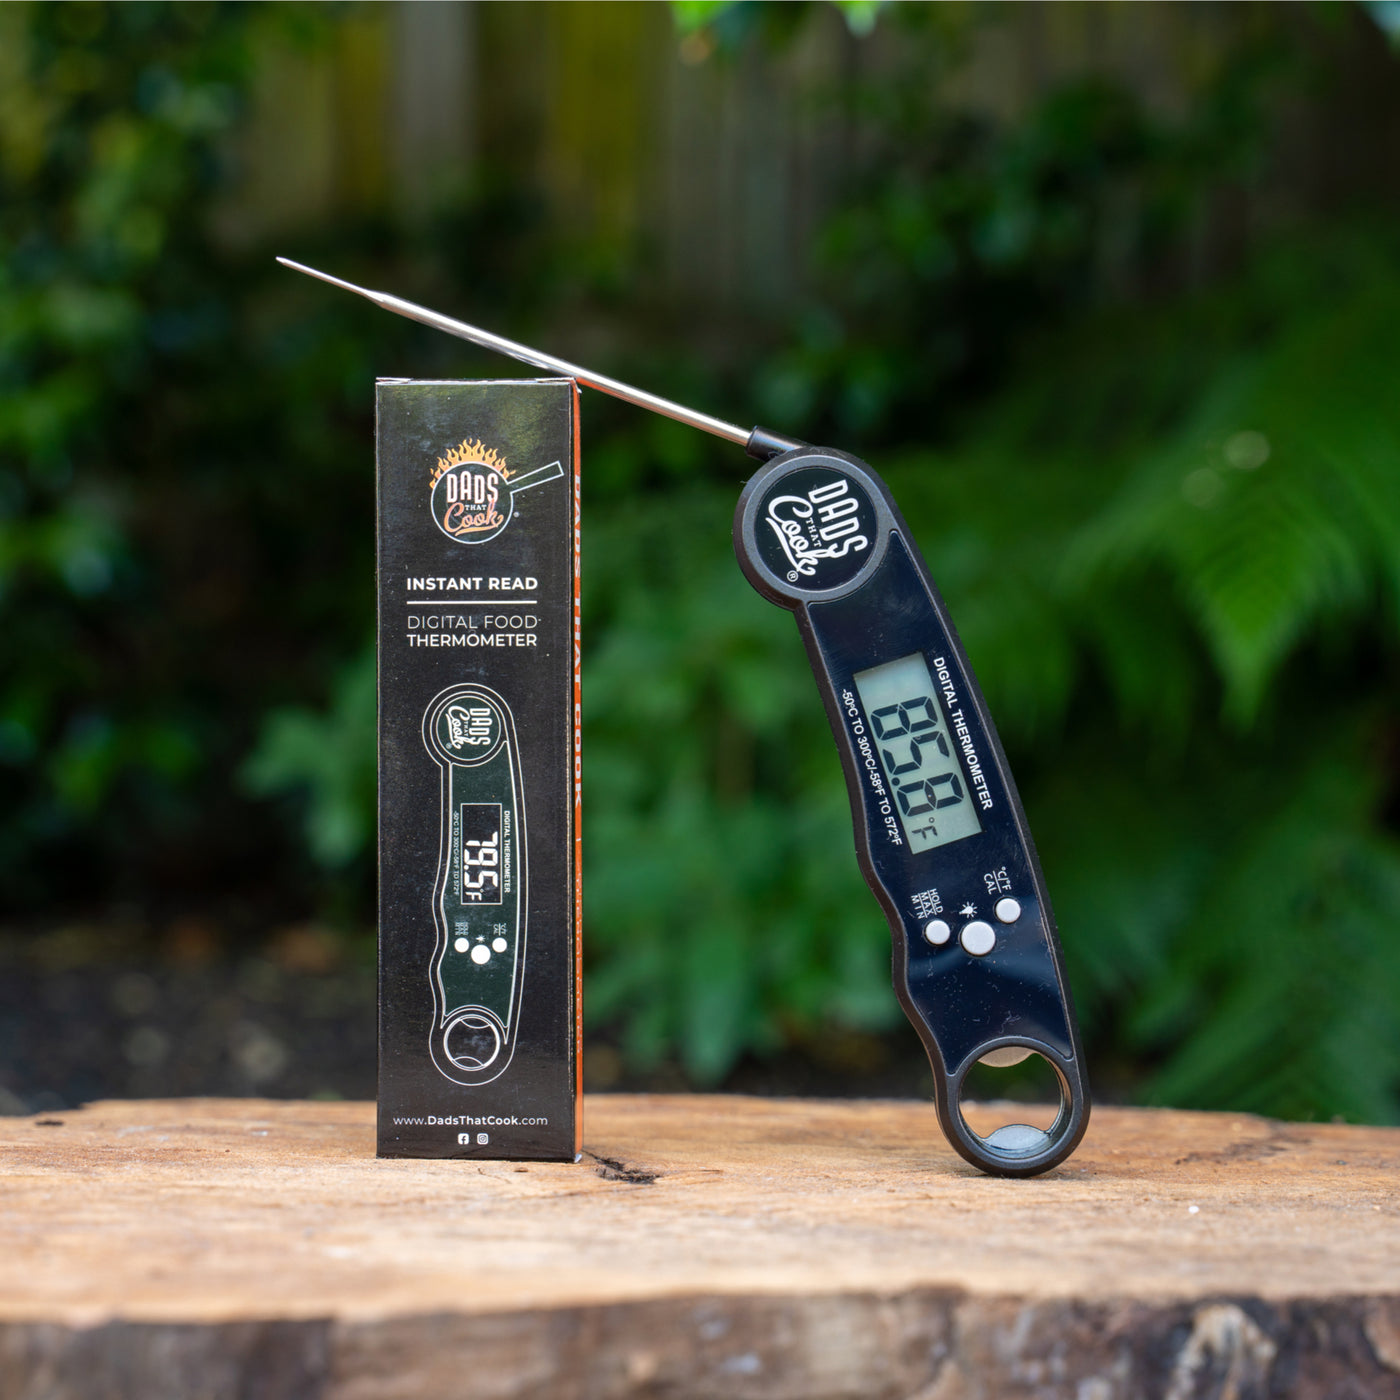 ADORIC Oven Thermometer, Digital Meat Thermometer, Instant Read